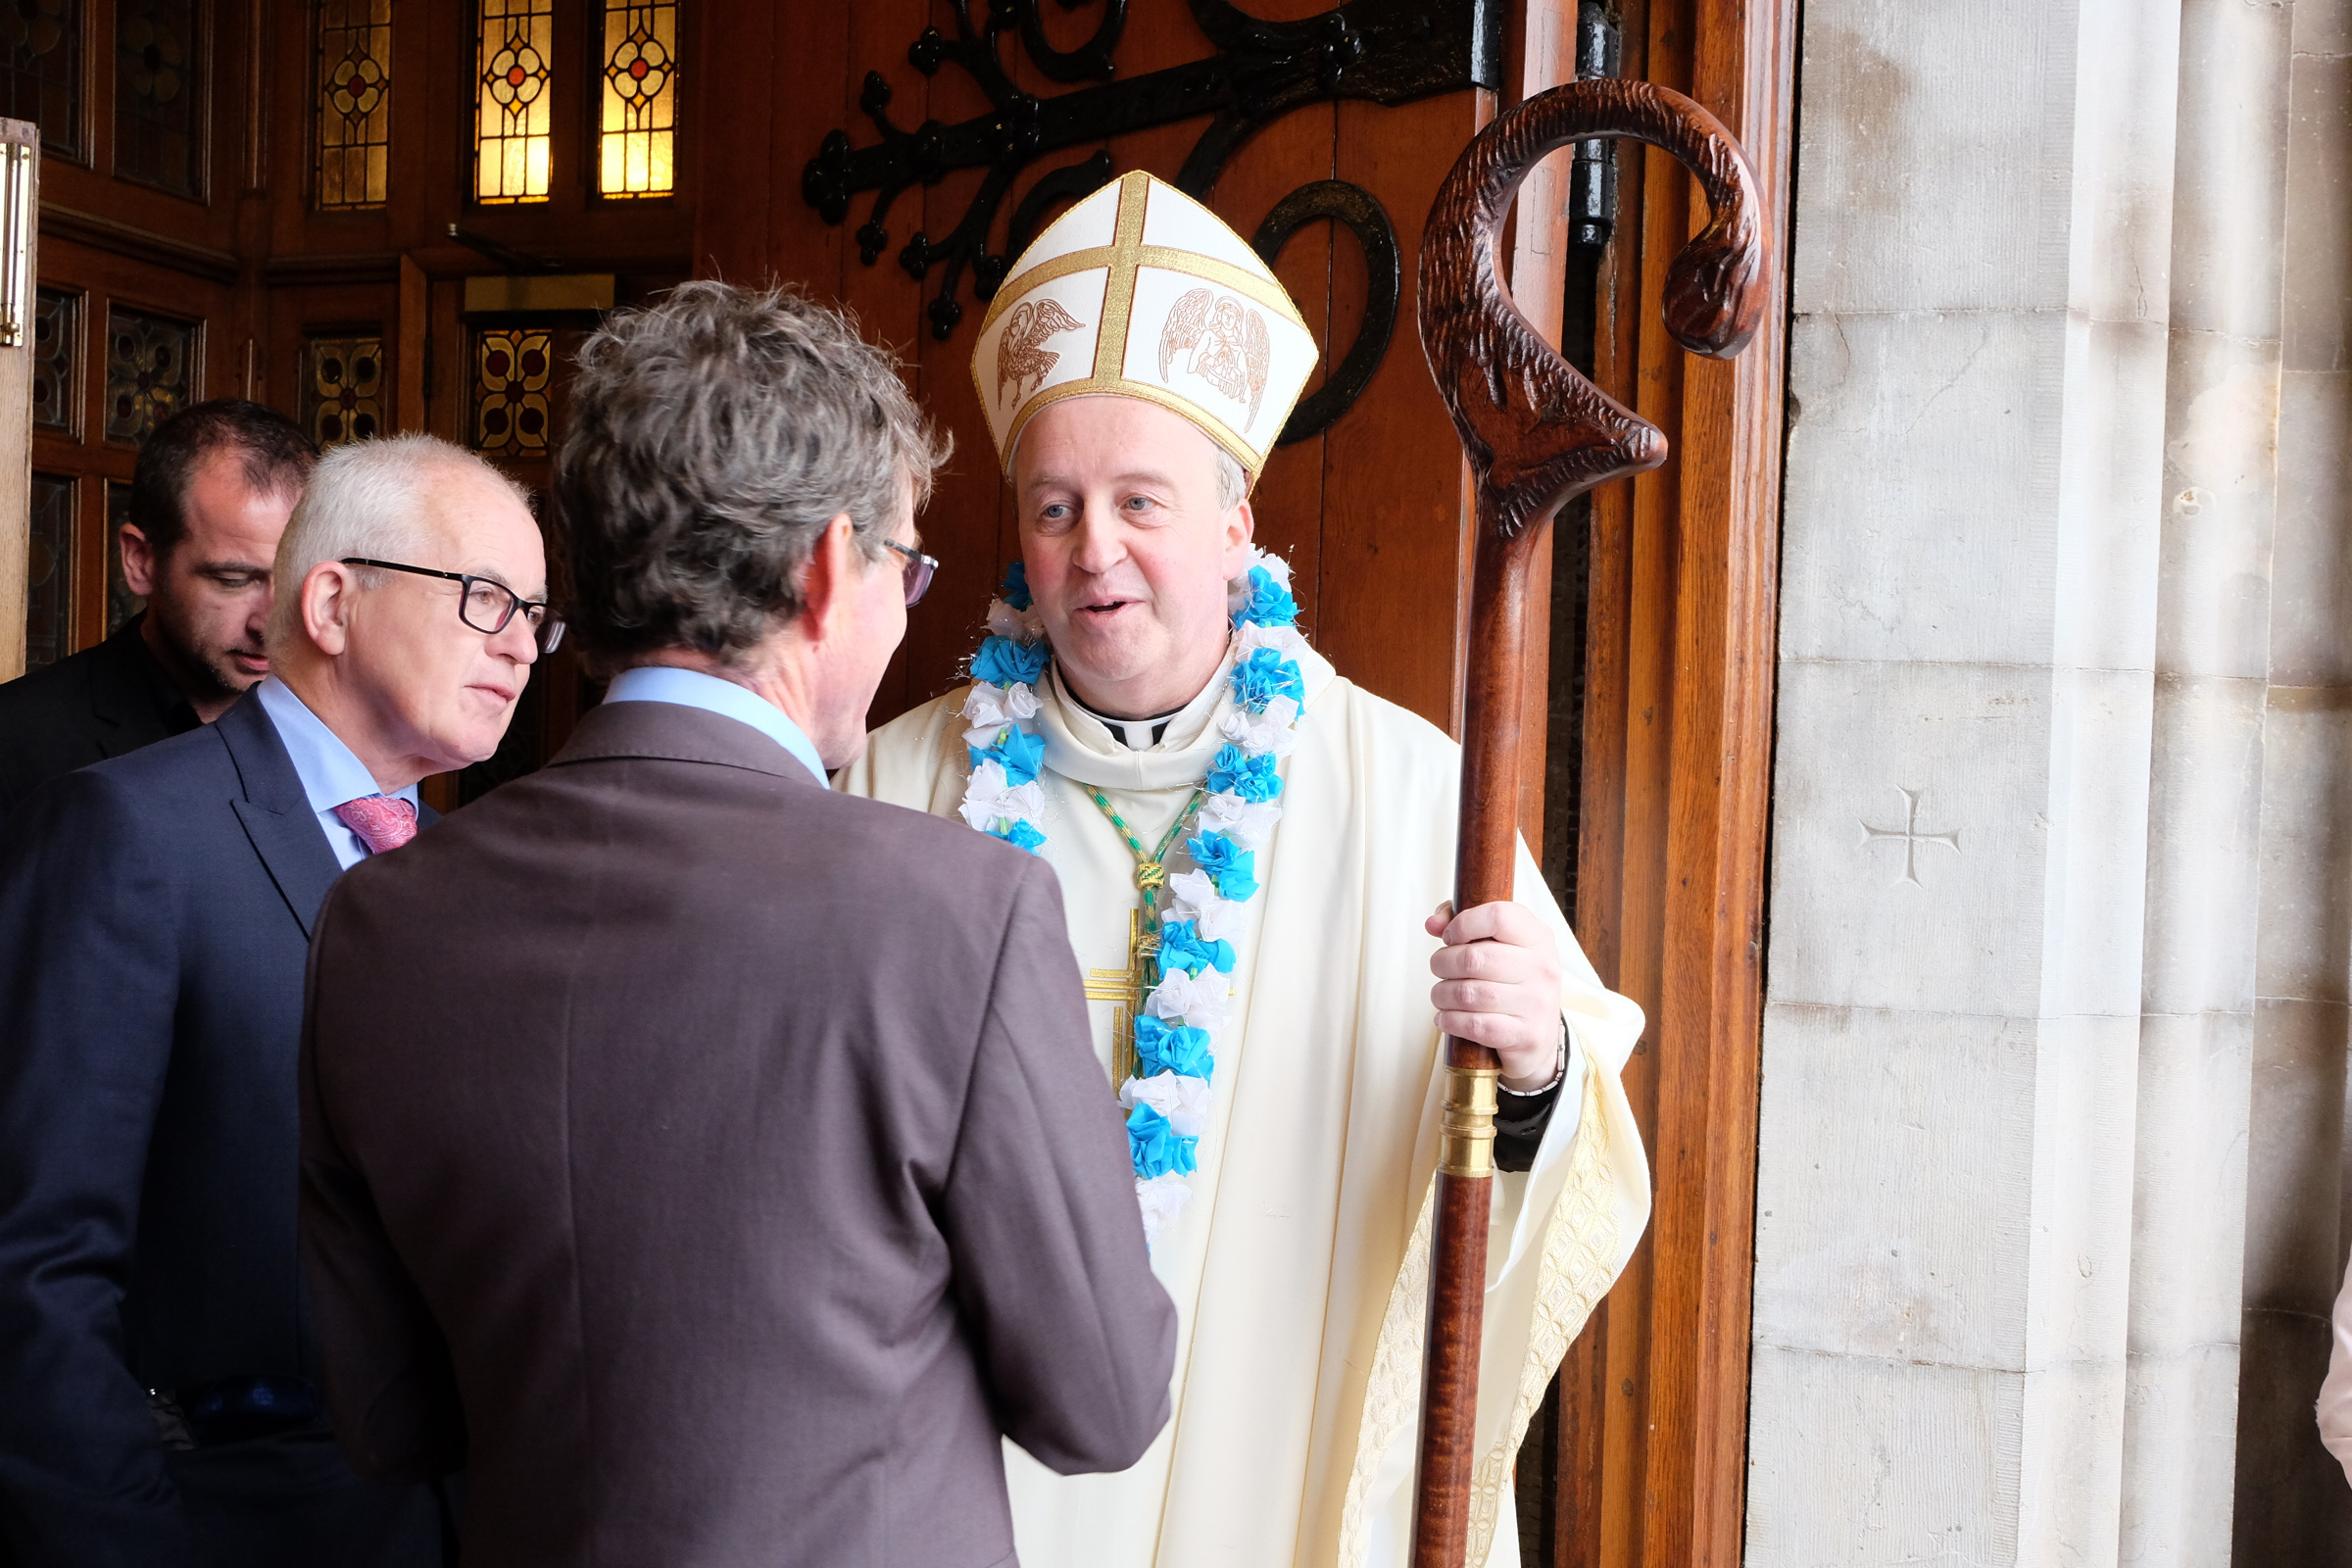 Ordination of Bishop Michael RouterSt Patrick's Cathedral, Armagh,  21 July 2019Credit: LiamMcArdle.com